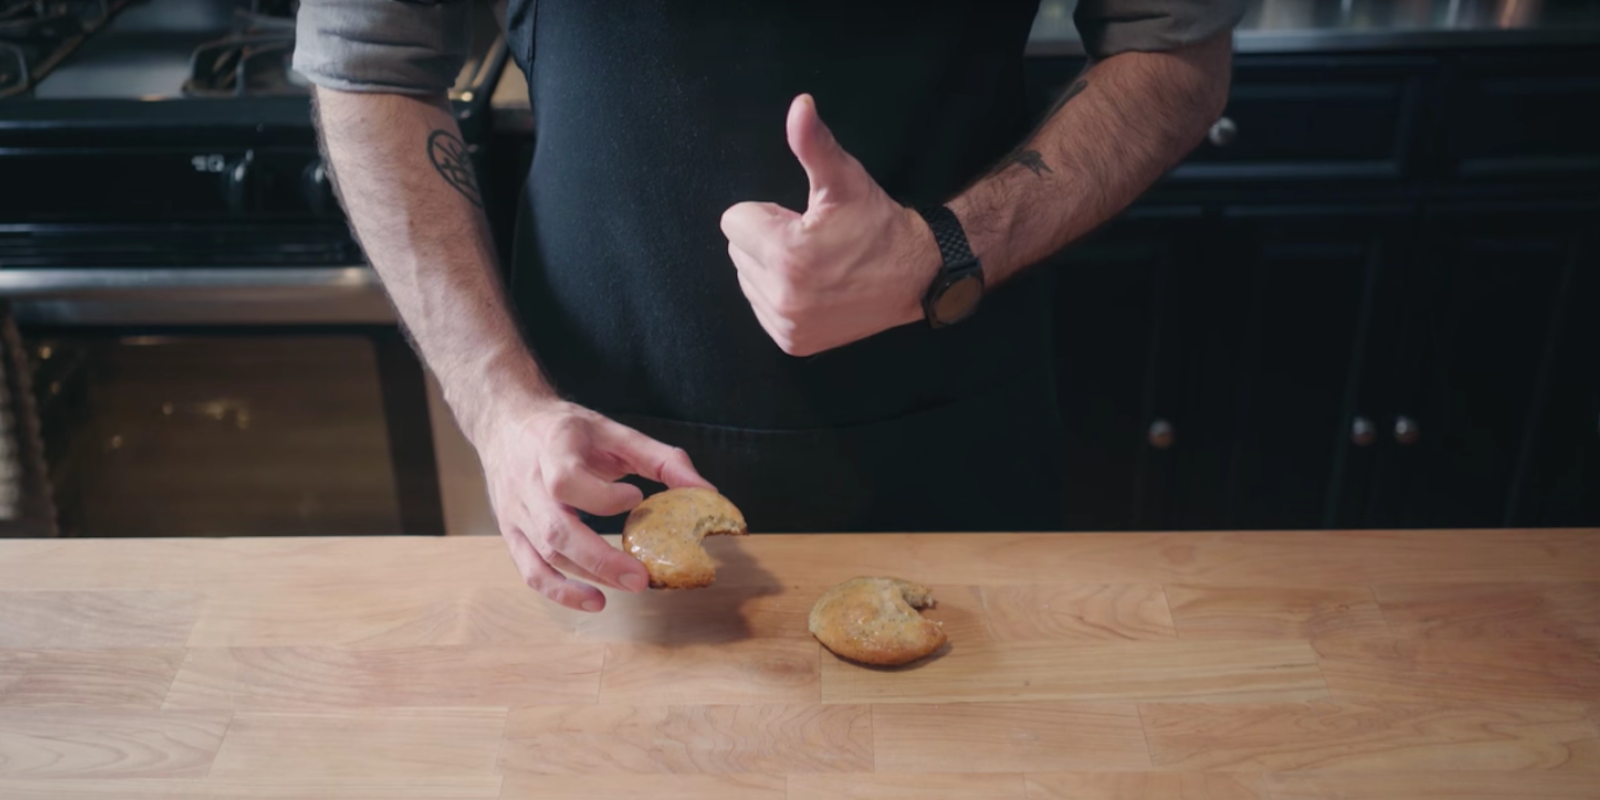 Binging With Babish does Seinfeld muffin tops